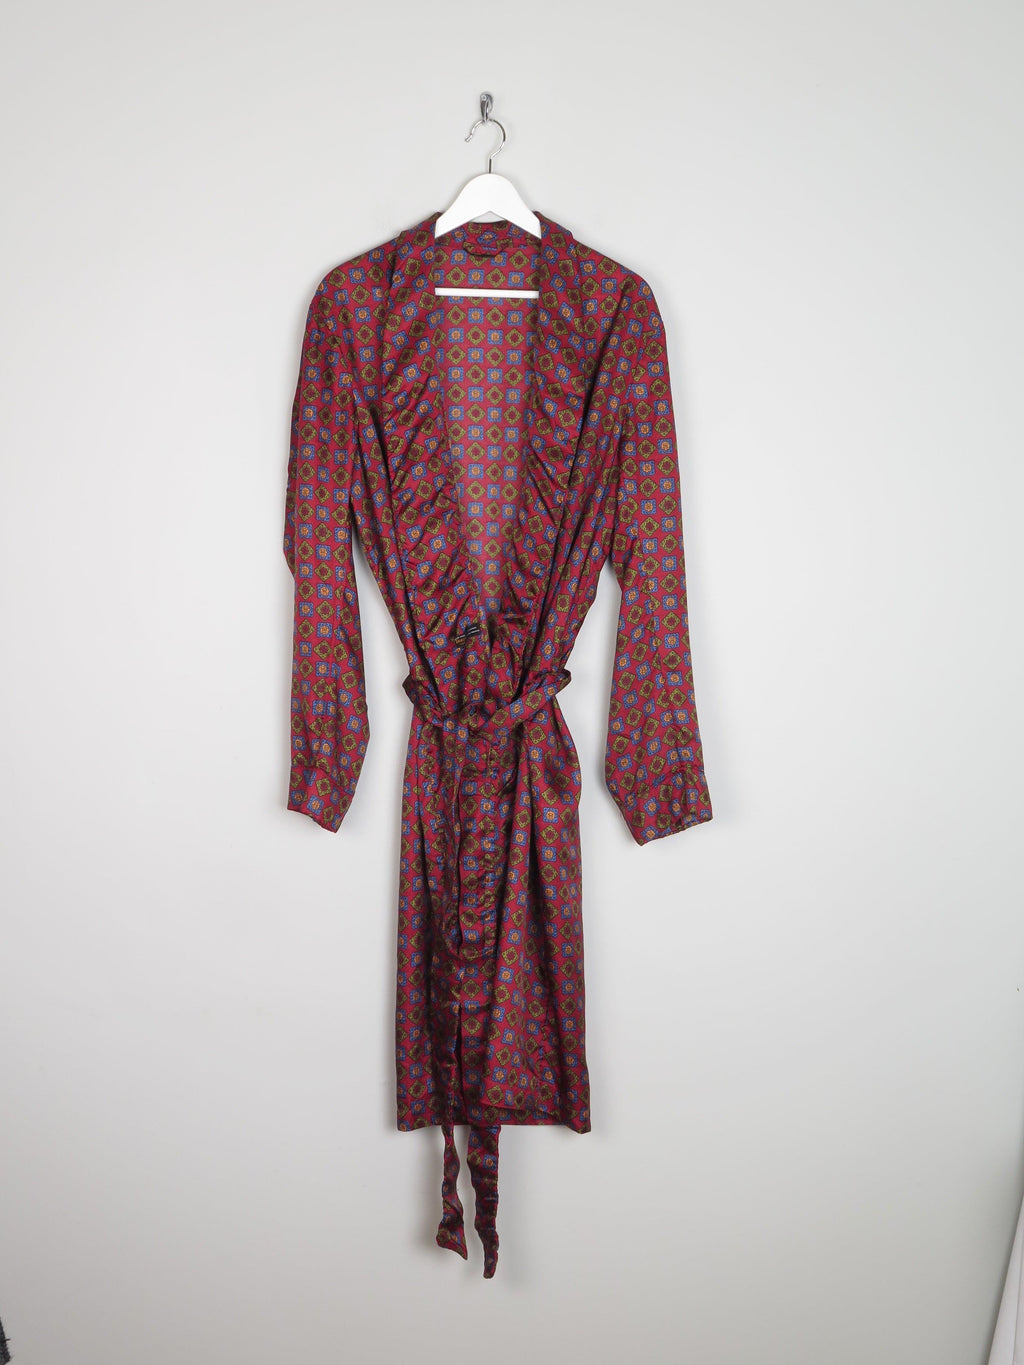 Mens Tootal Hortex Paisley Vintage Smoking Style Dressing Gown M/L - The Harlequin